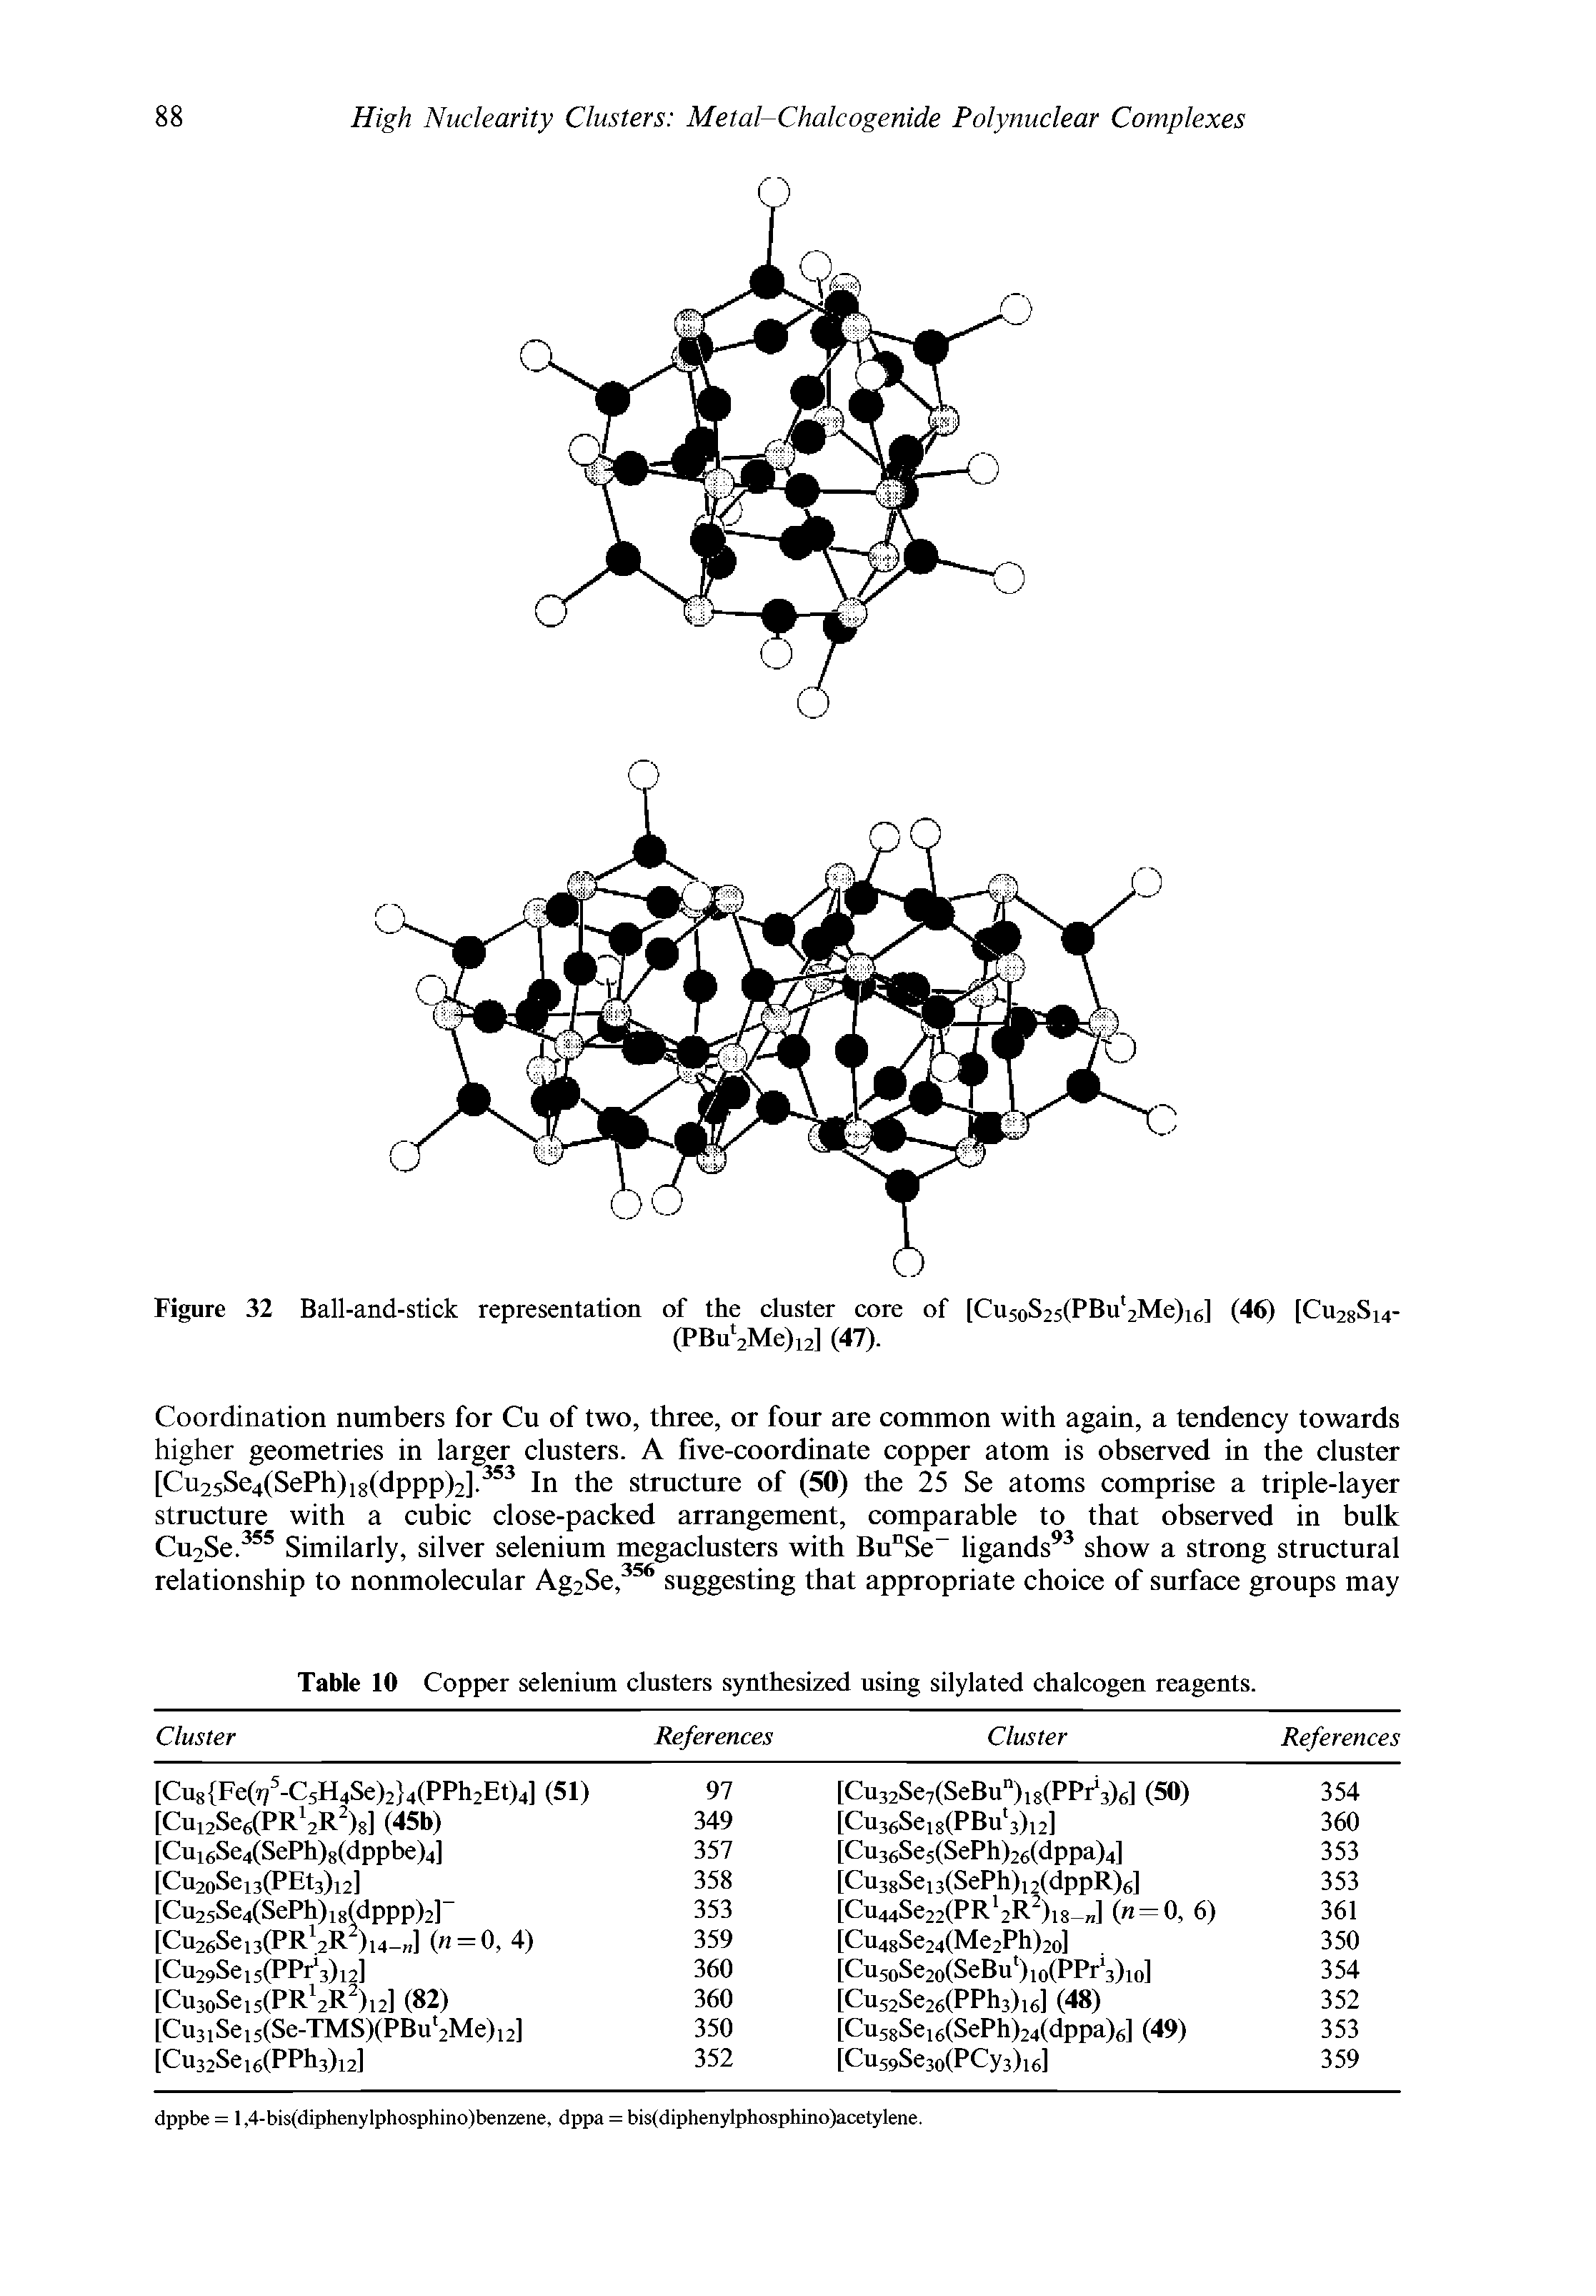 Table 10 Copper selenium clusters synthesized using silylated chalcogen reagents.